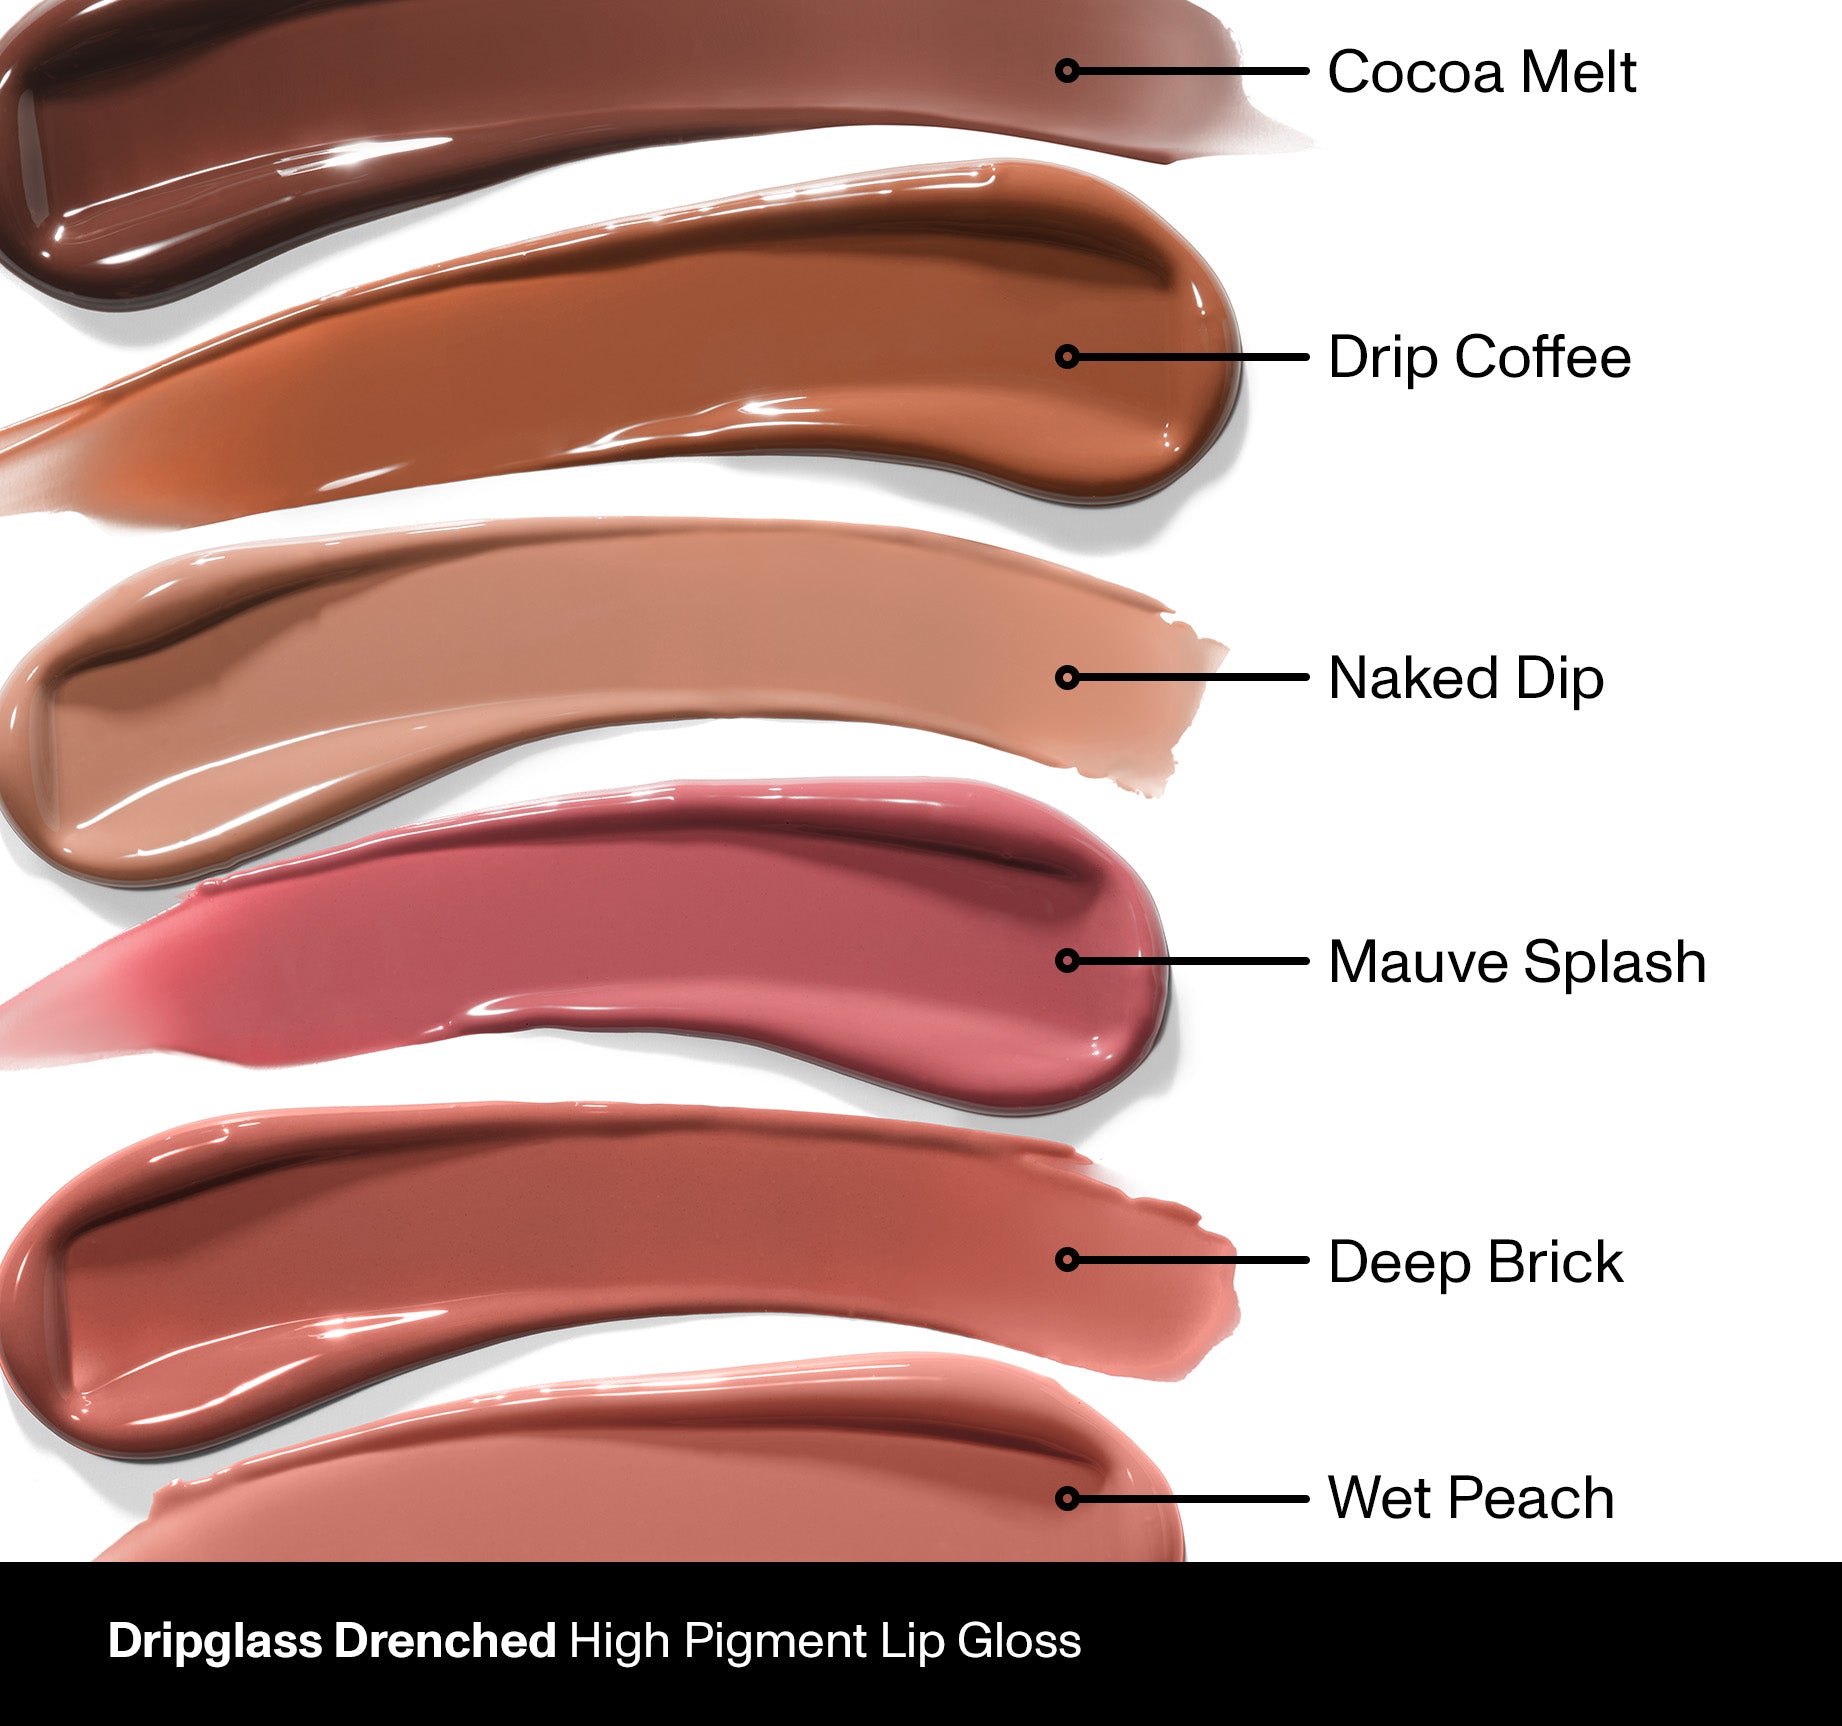 Dripglass Drenched High Pigment Lip Gloss - Cocoa Melt - Image 9